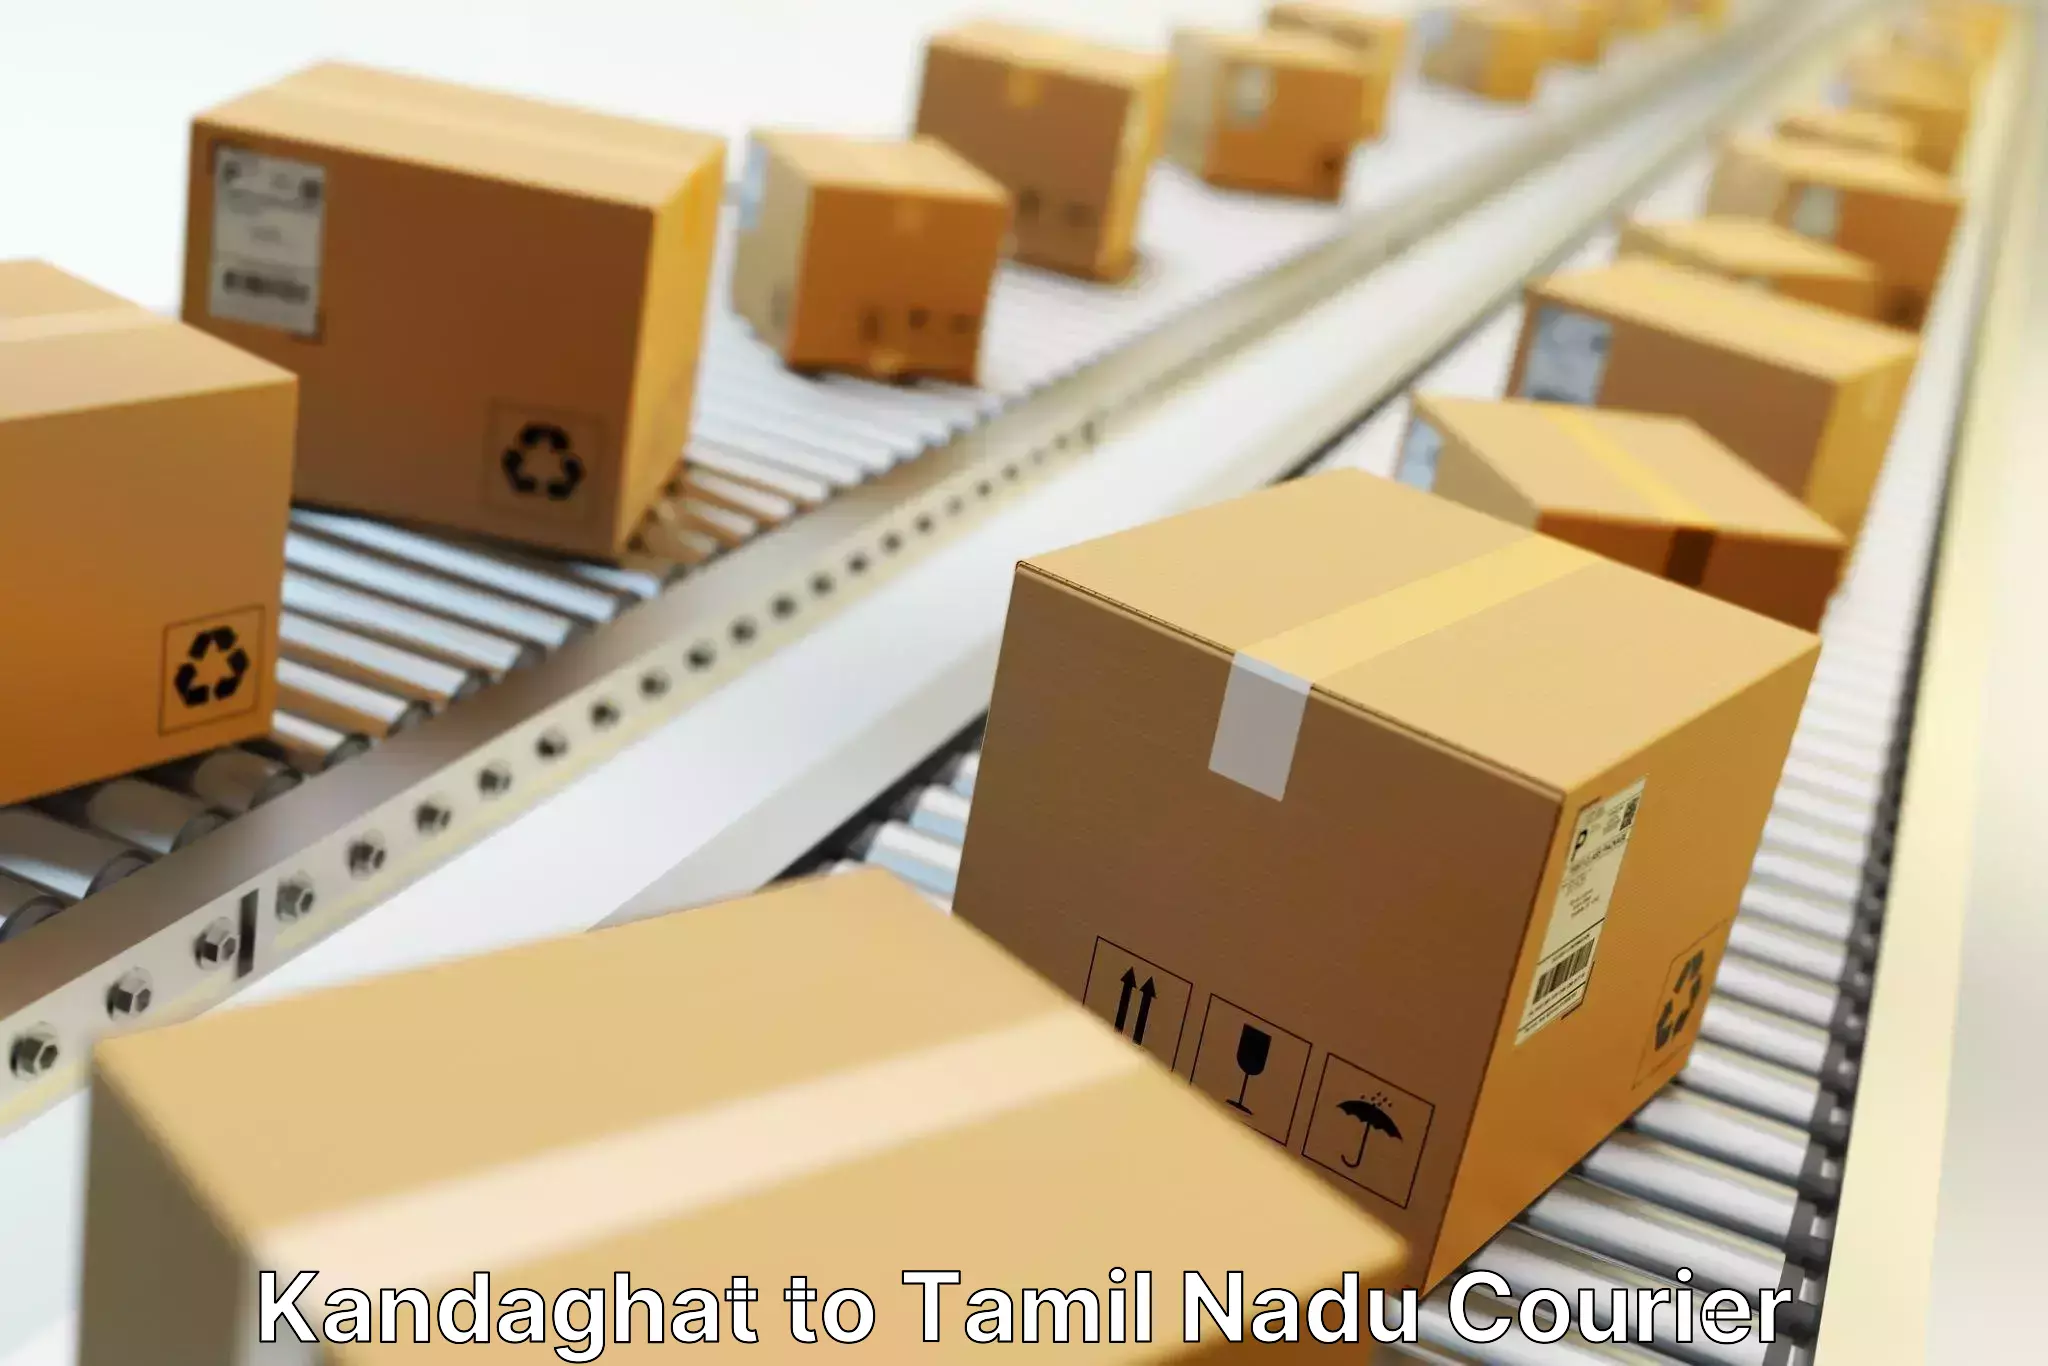 Express courier capabilities Kandaghat to Chennai Port